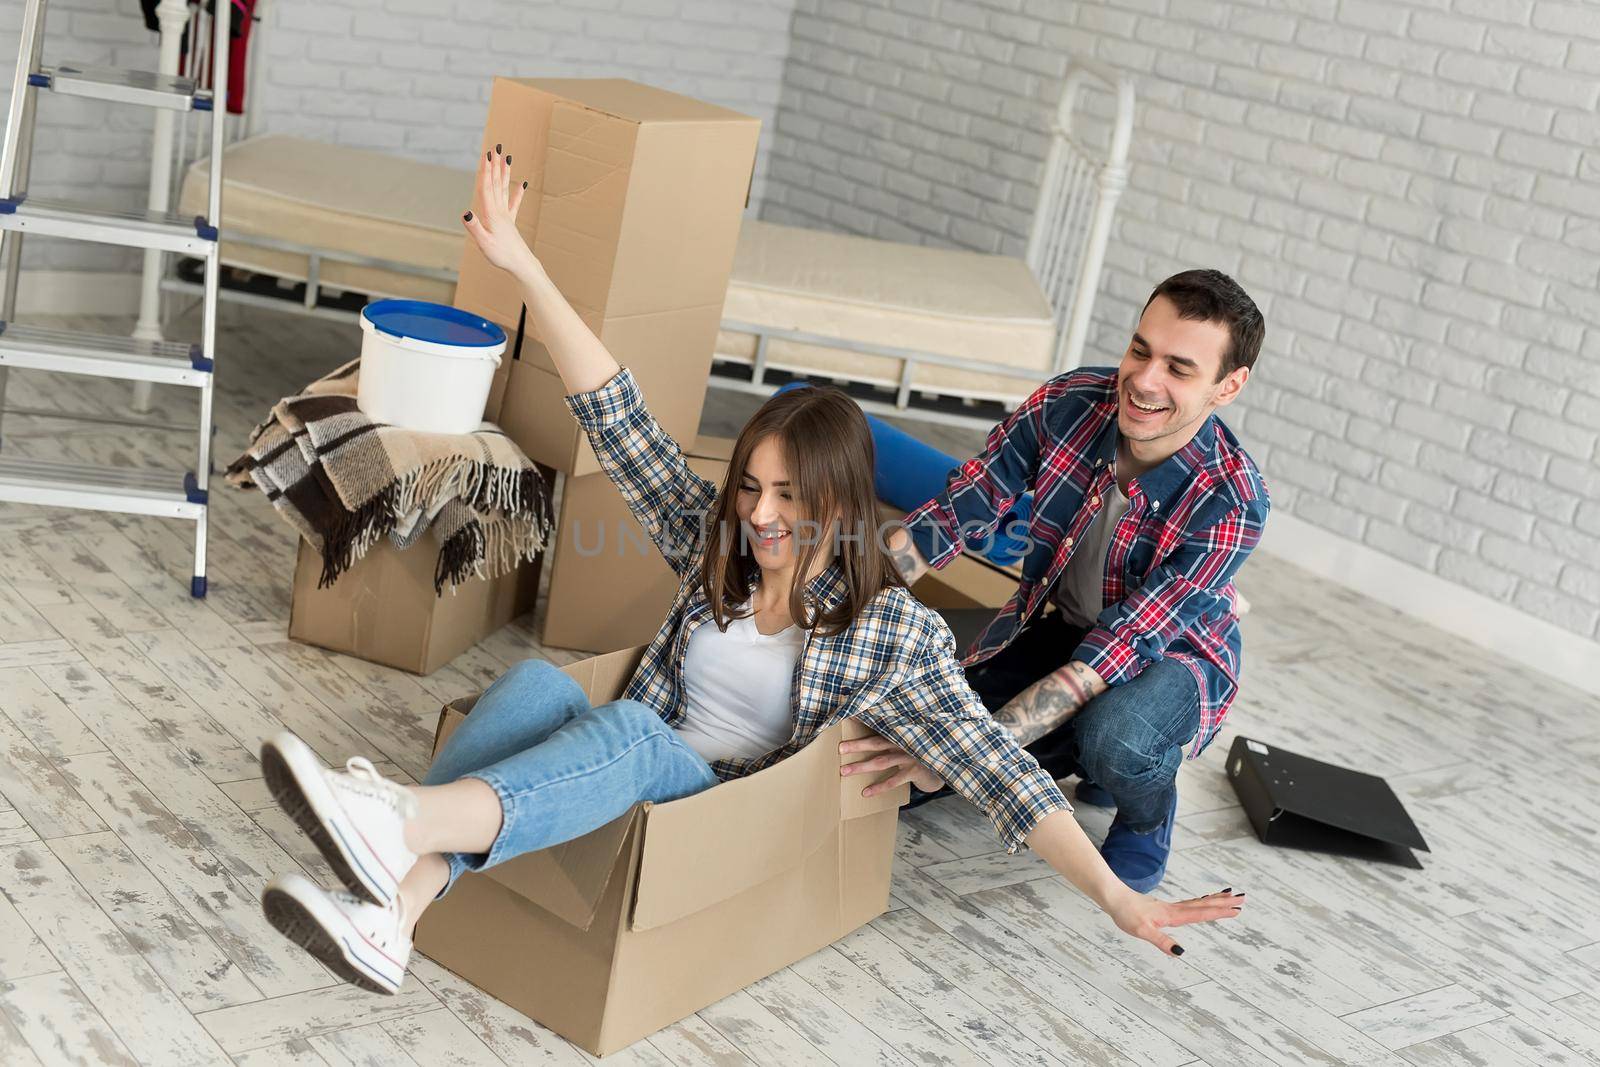 Happy couple having fun laughing moving into new home, young excited woman riding sitting in cardboard box while man pushing it, cheerful roommates playing while packing unpacking belongings together